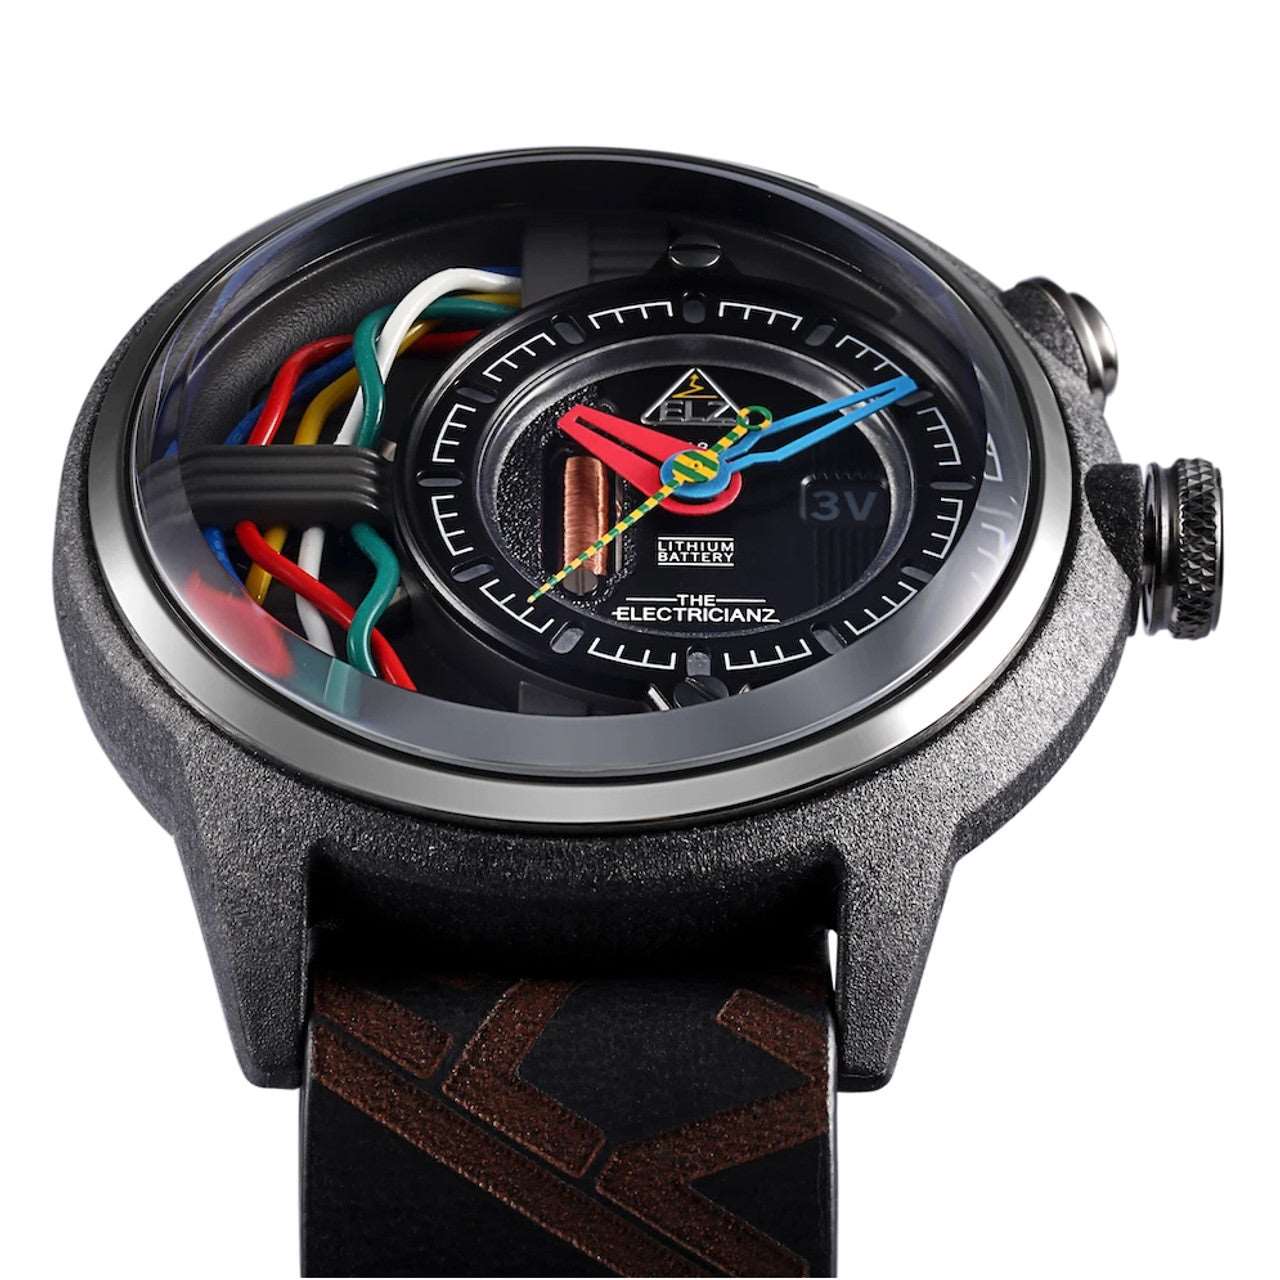 The Electricianz Nomad Z 42mm Ecru Calfskin Leather | Watches.com